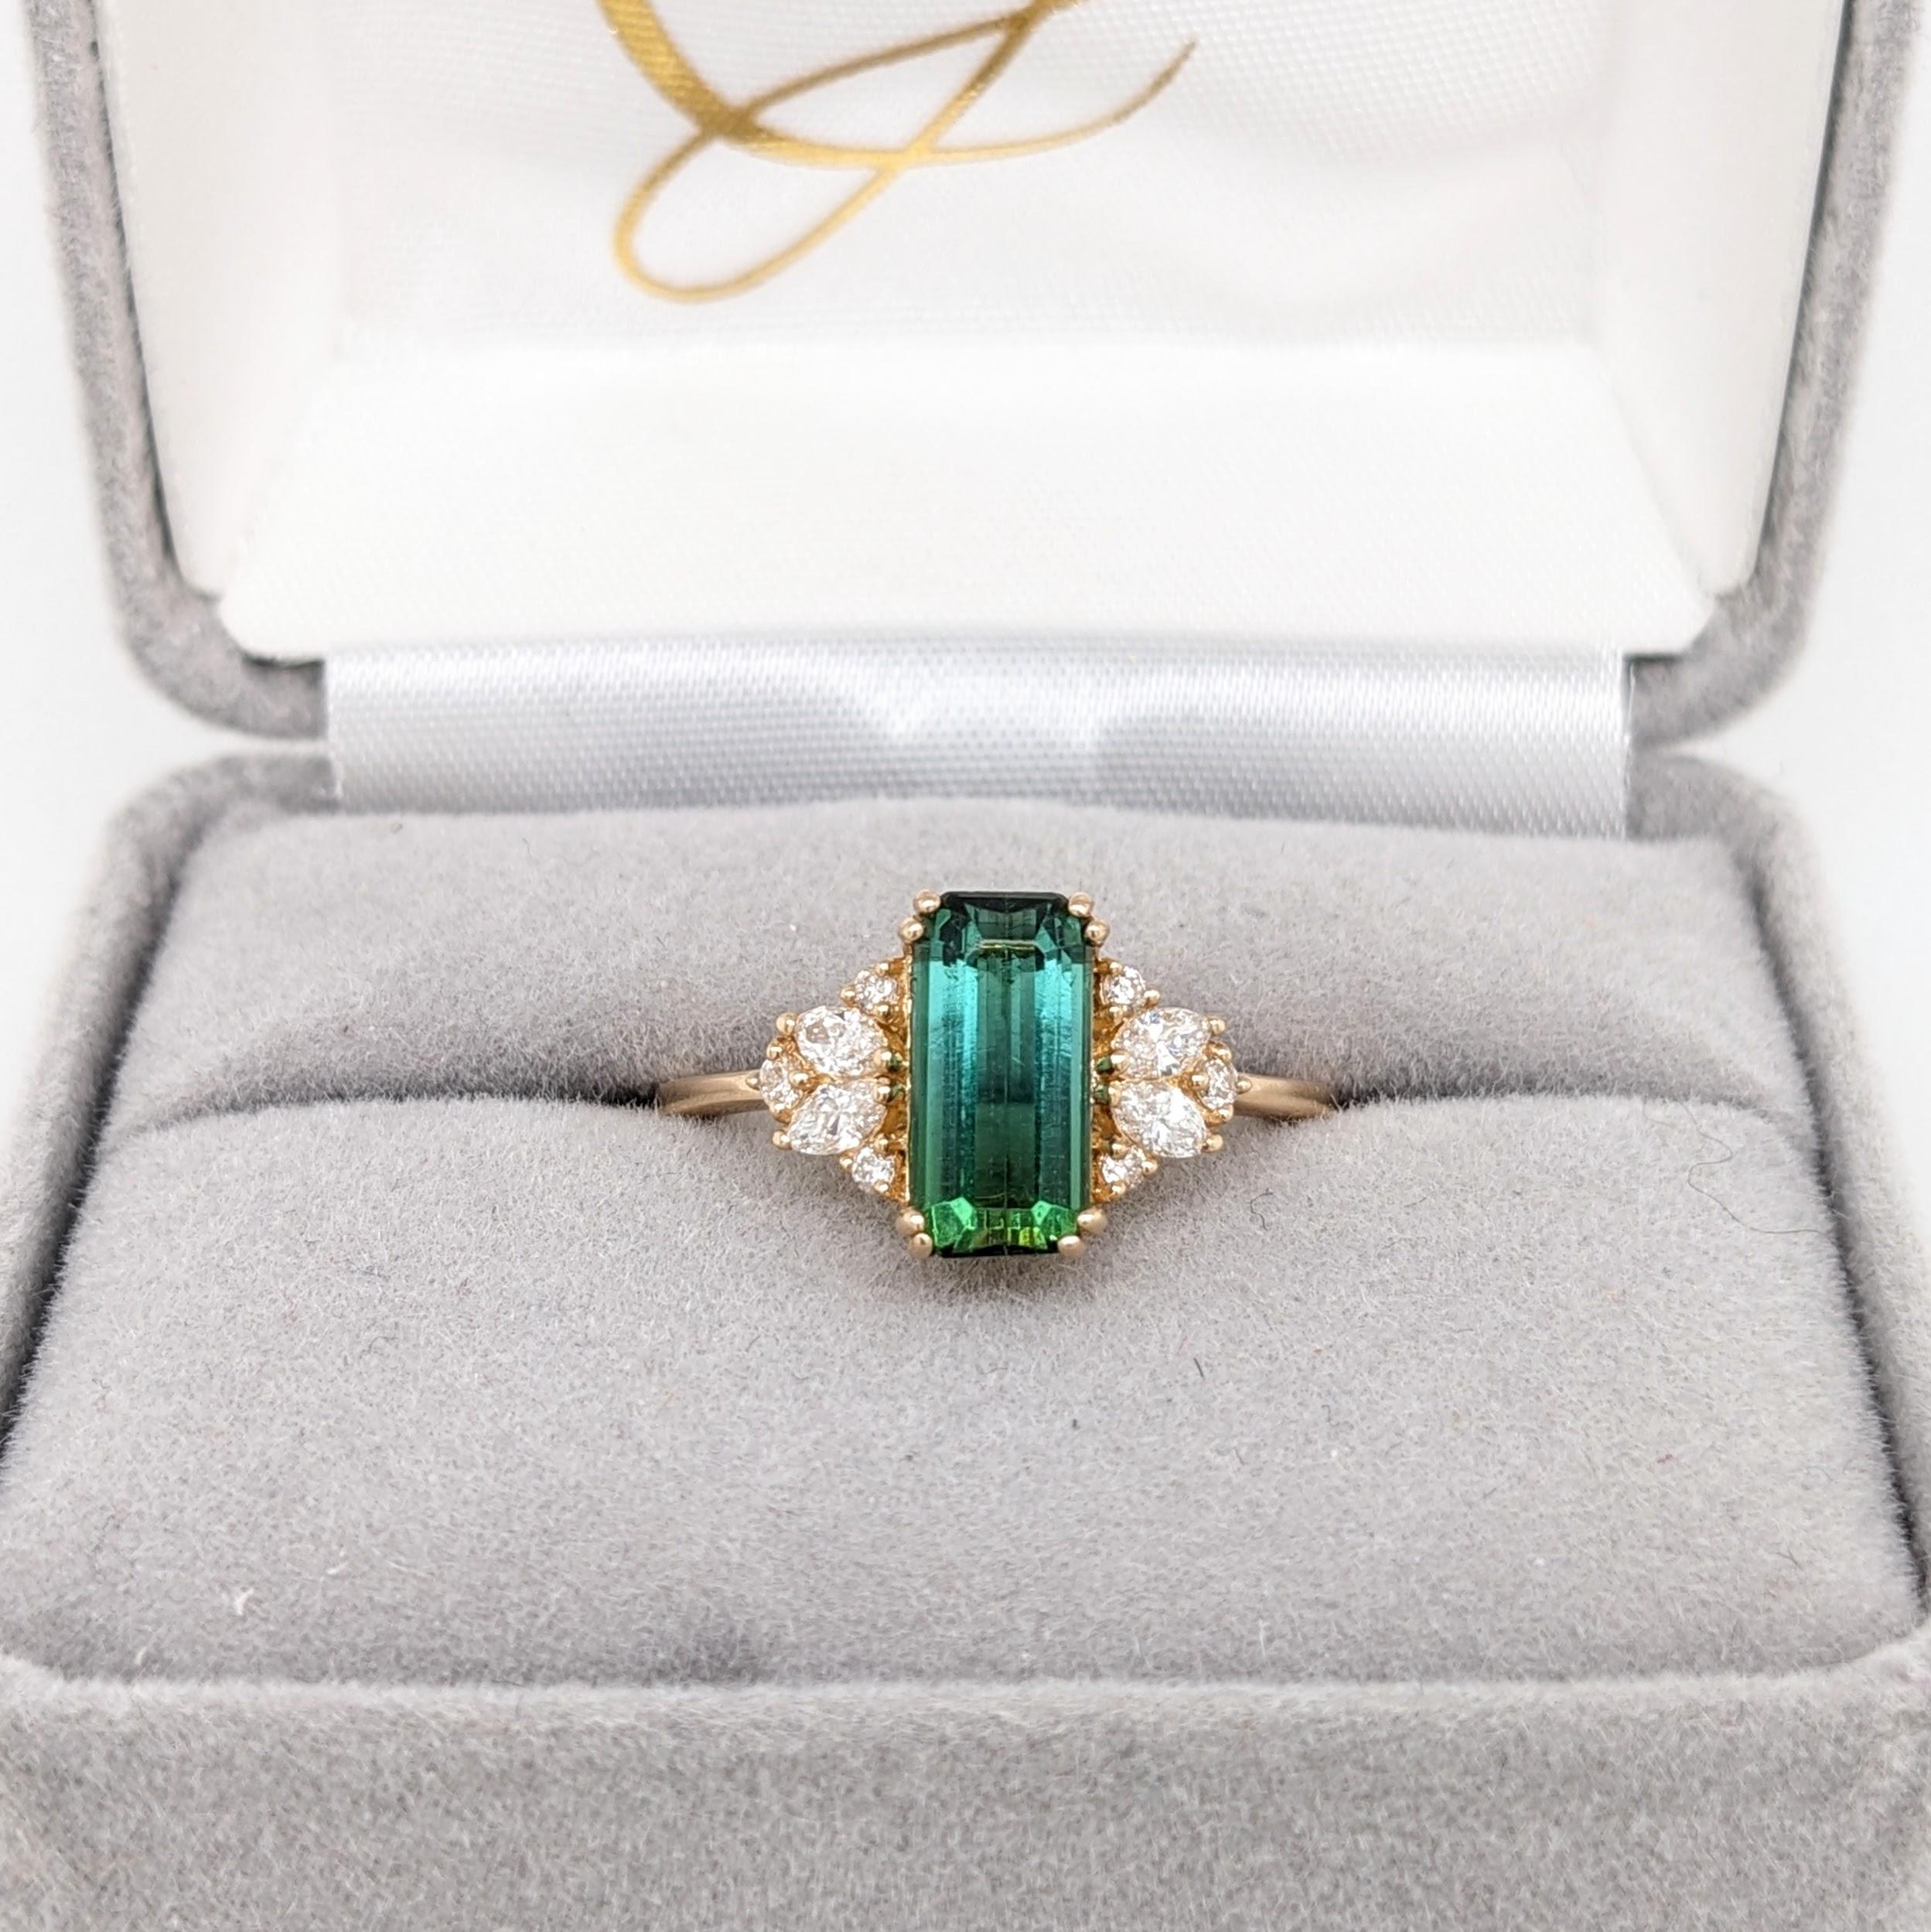 1.51ct Tourmaline w Diamond Accents in 14k Solid Yellow Gold Emerald Cut 10x4mm For Sale 3